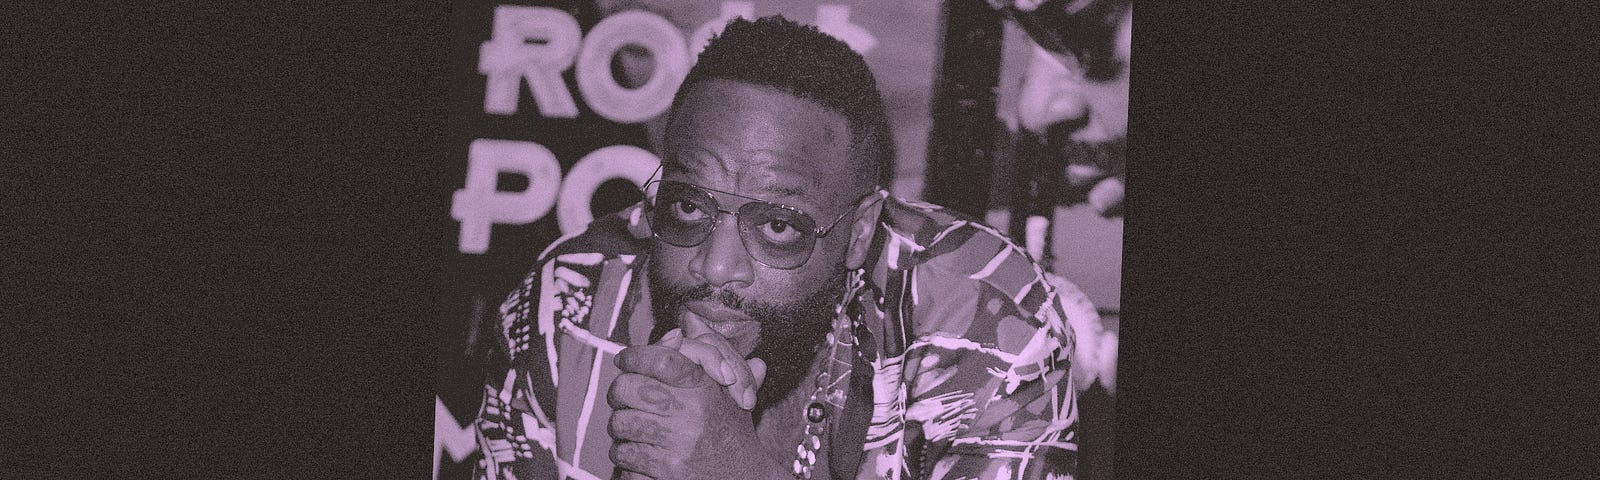 A photo of Rick Ross